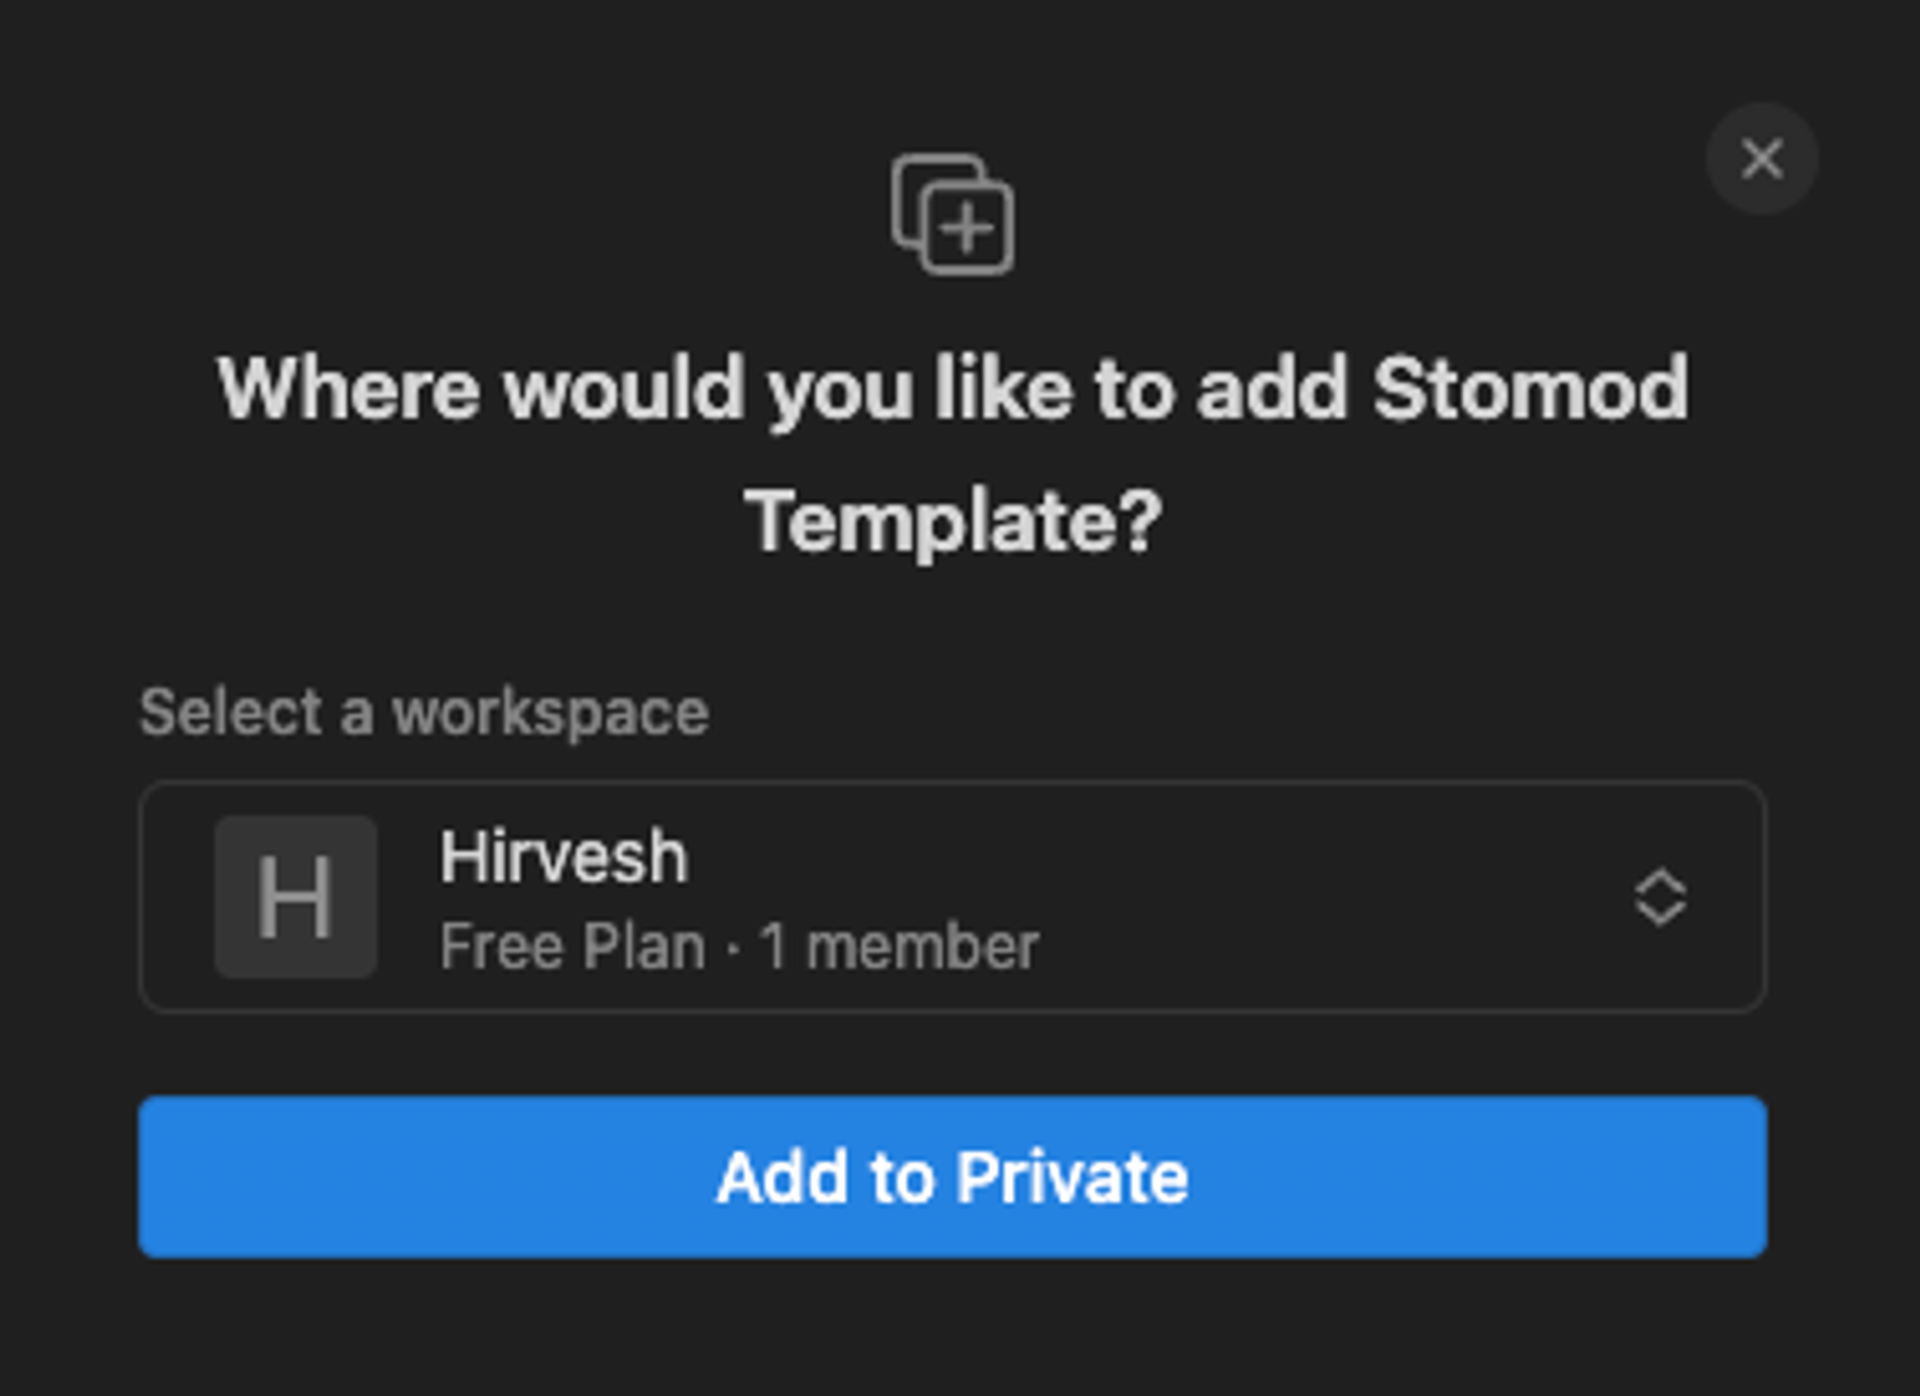 Choose the workspace you want to duplicate the Stomod template into if you have multiple workspaces